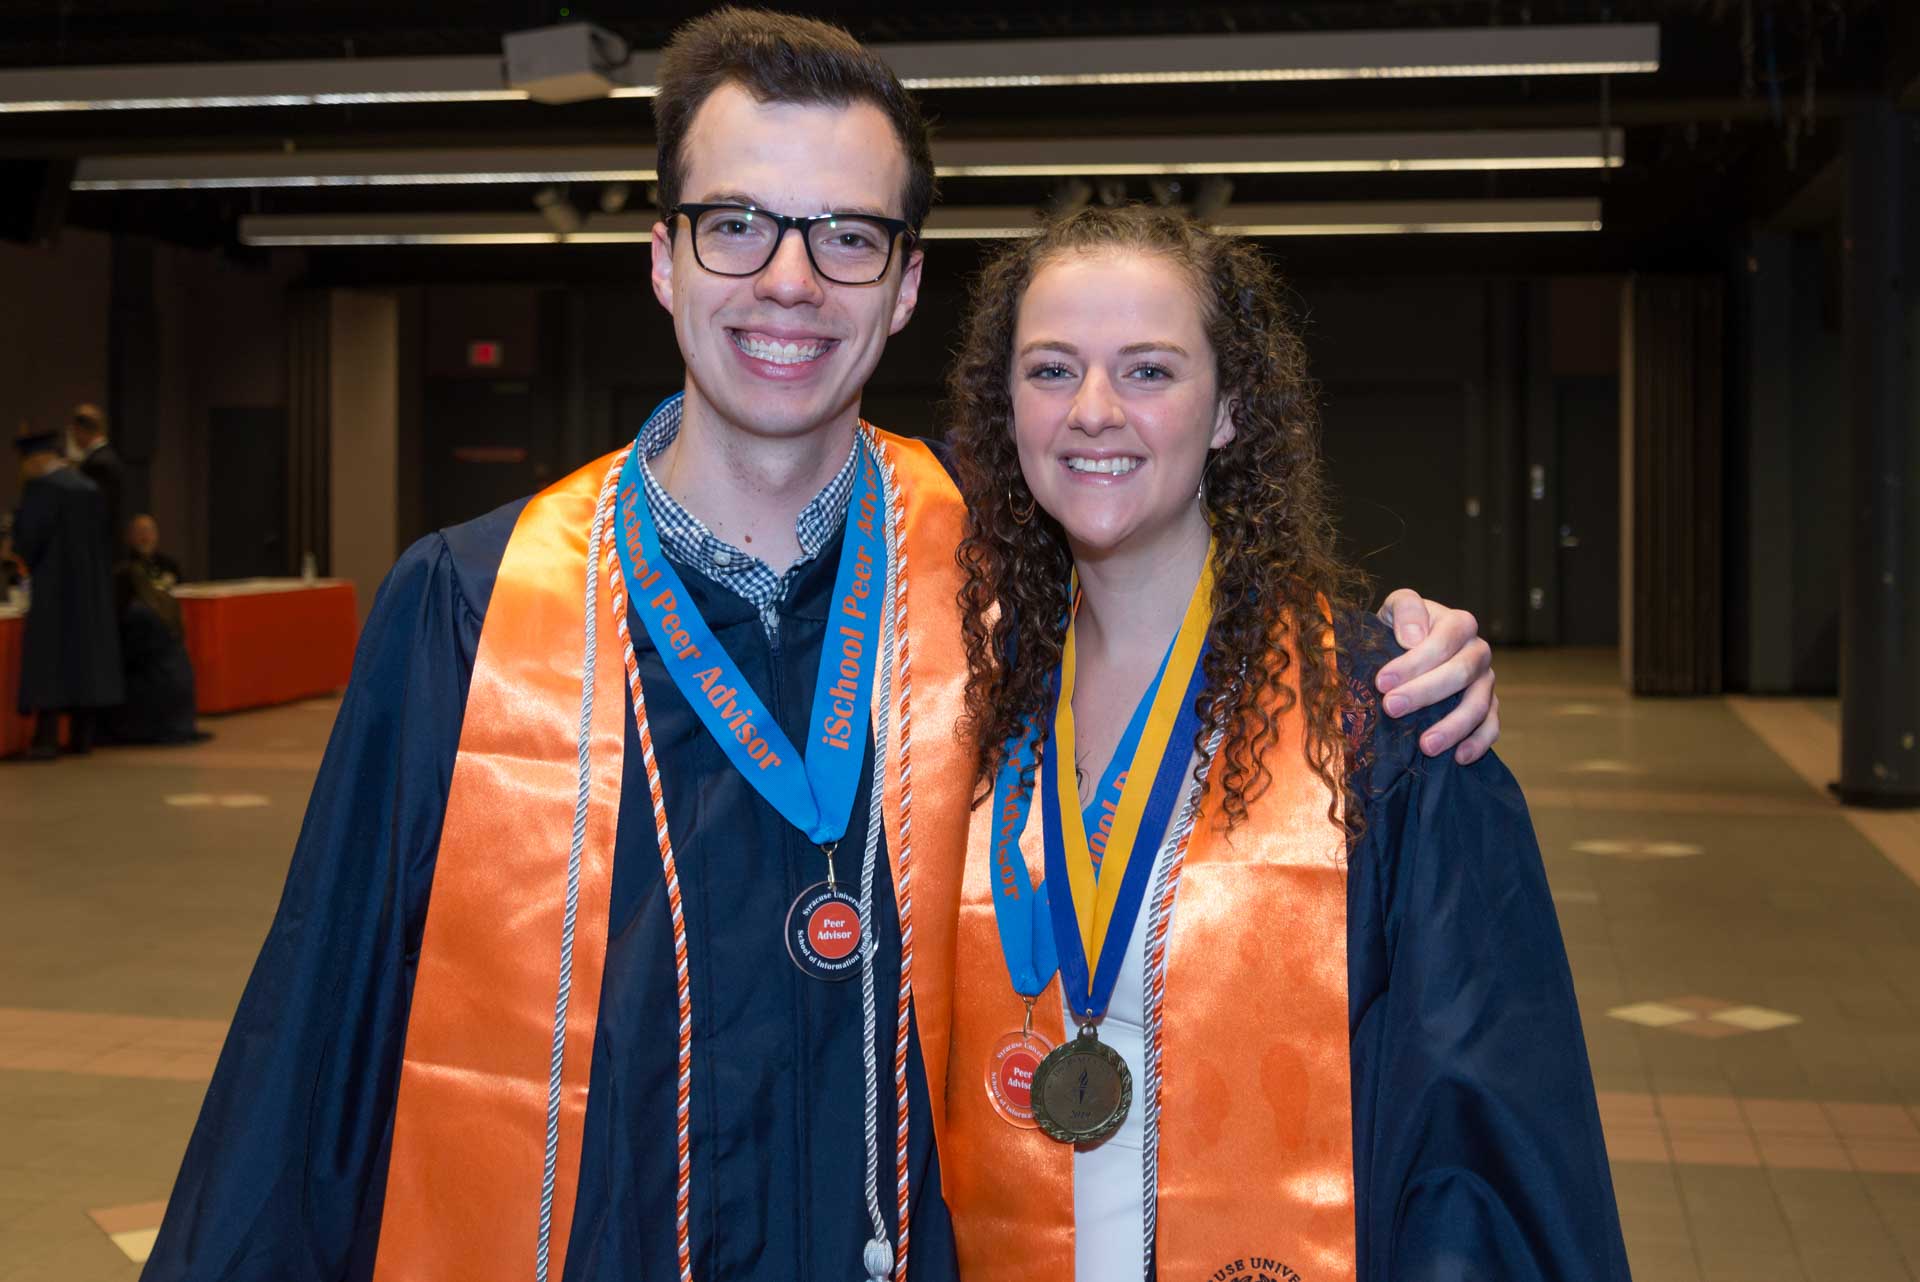 Two students together at 2019 graduation